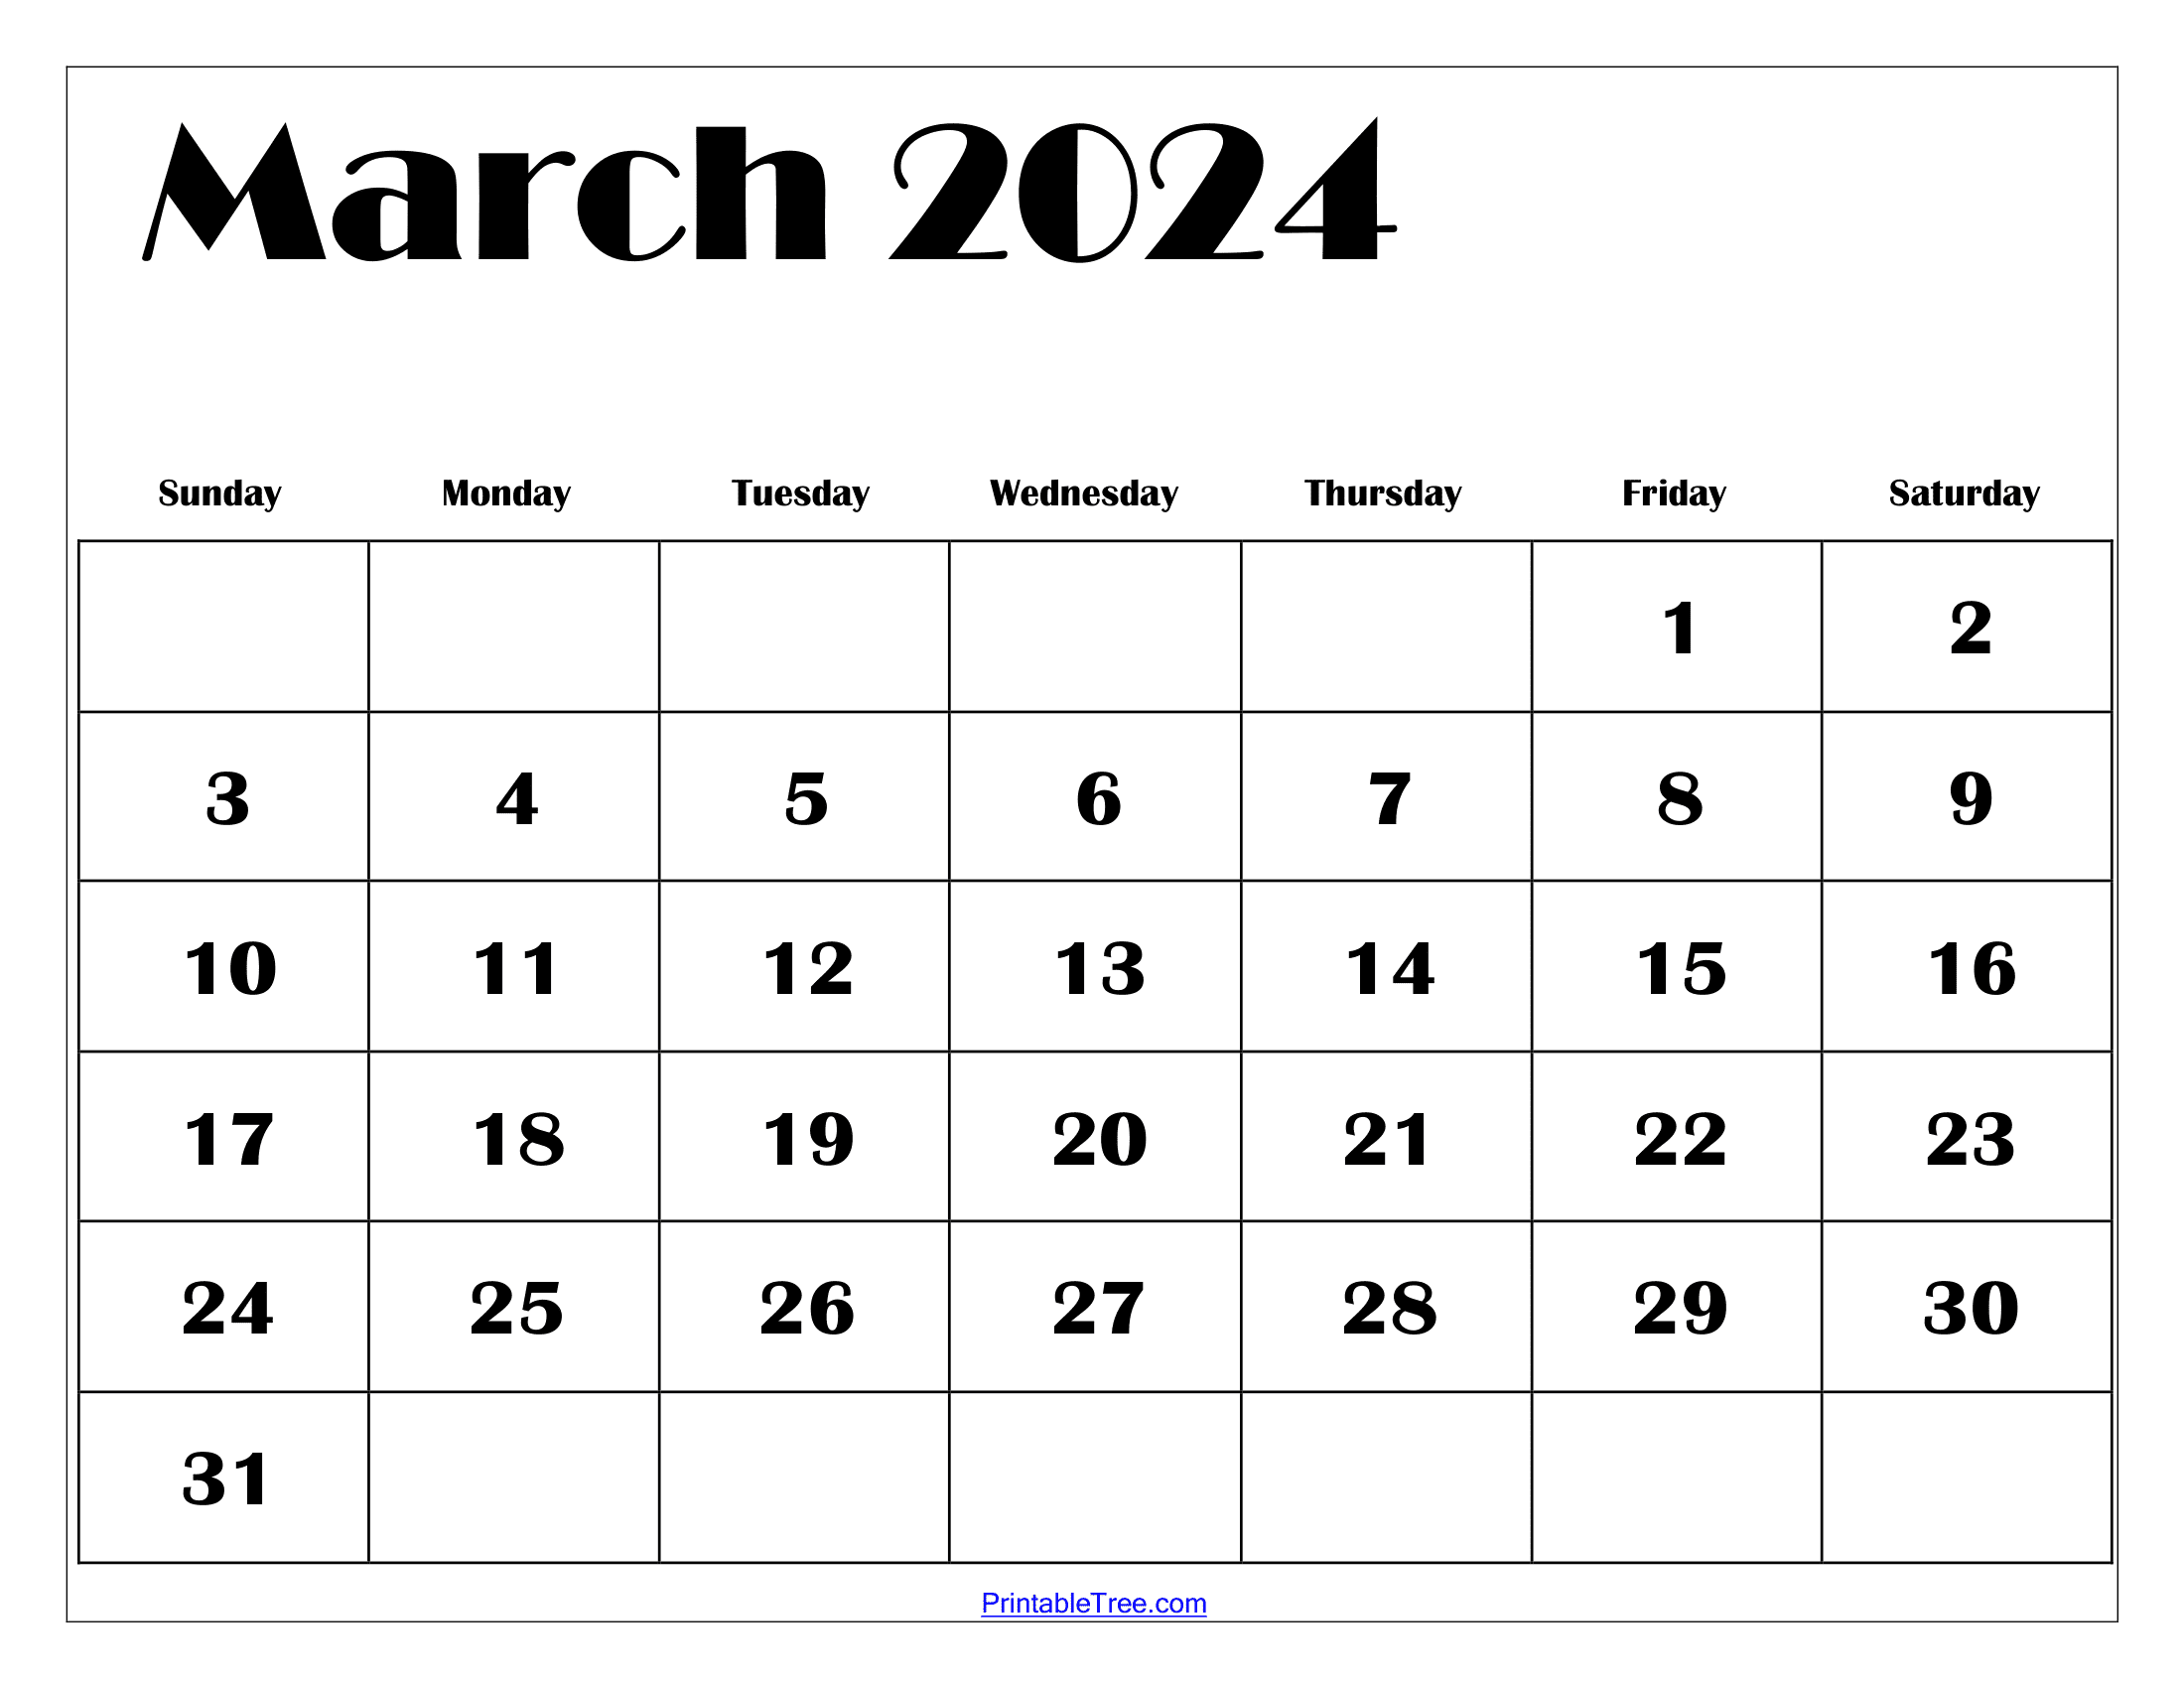 March 2024 Calendar Printable Pdf With Holidays Template Free for March 2024 Monthly Calendar Printable